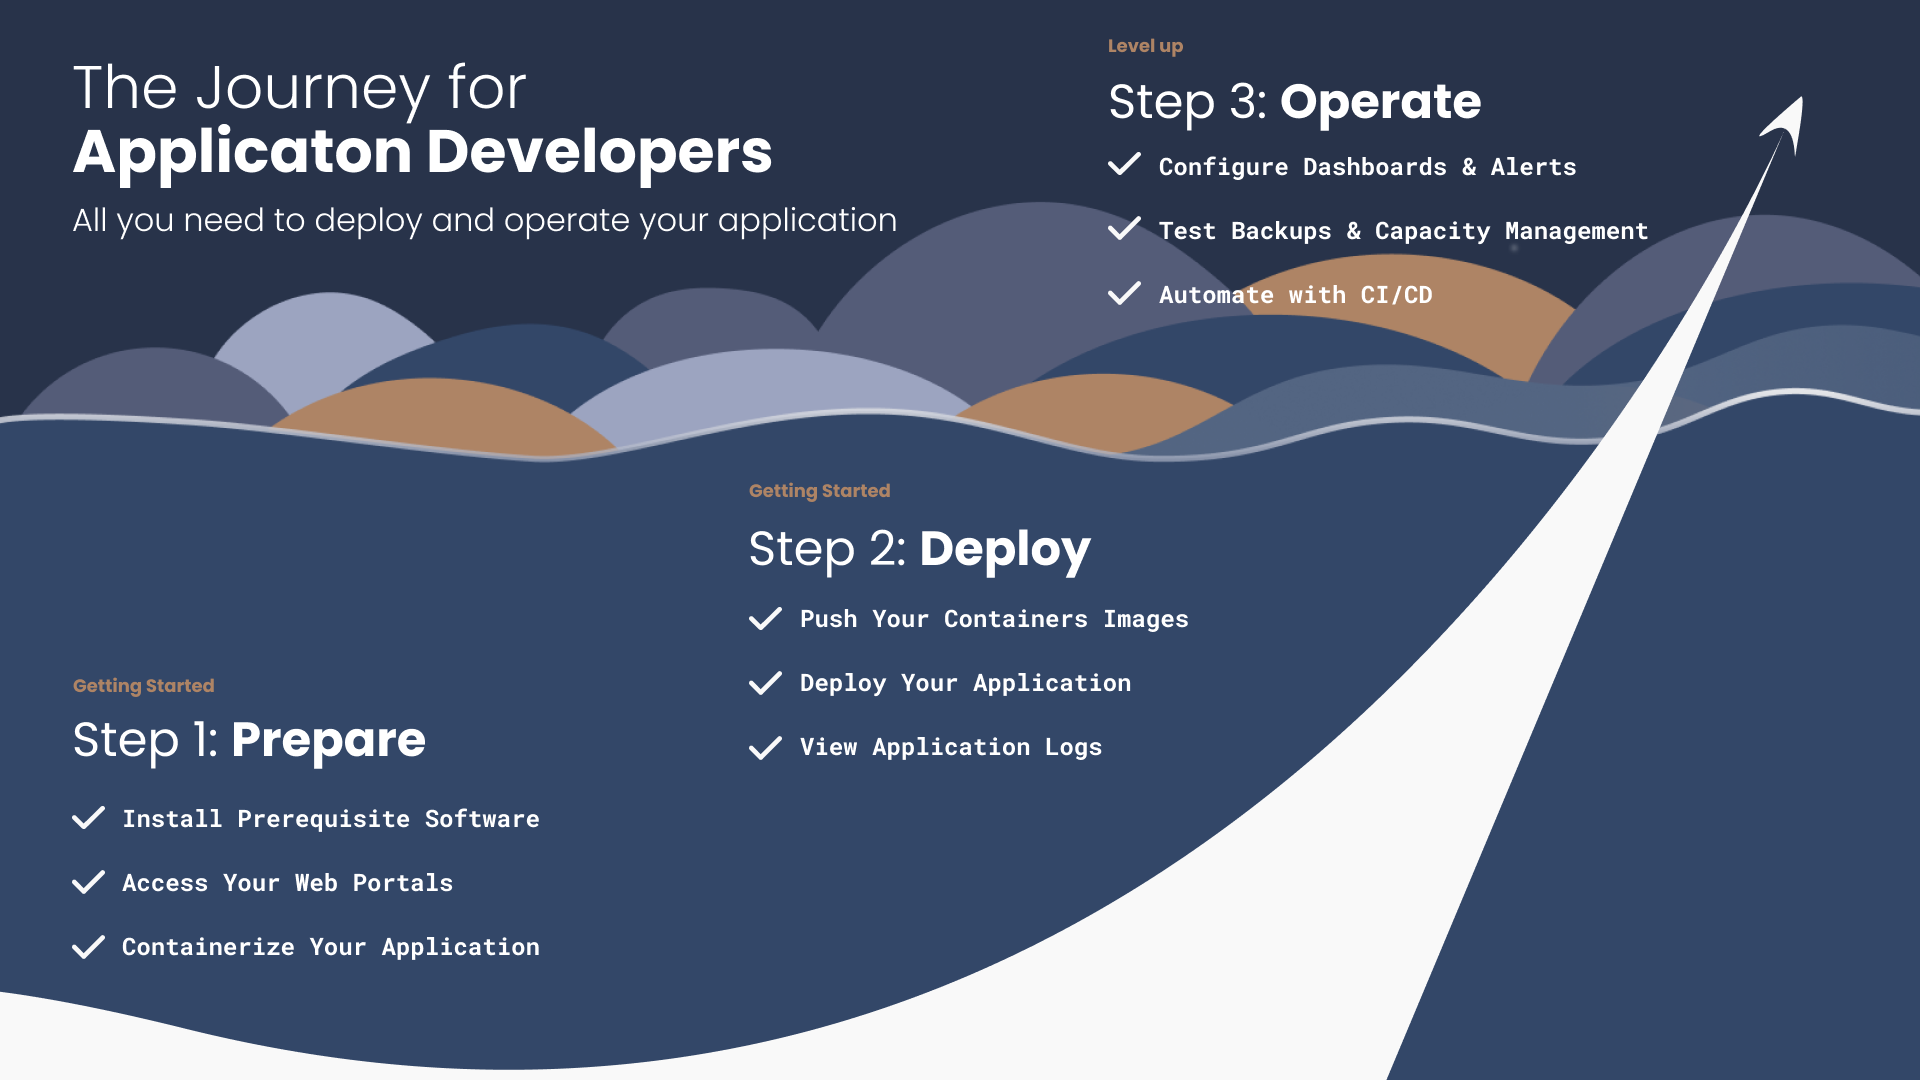 The Journey for Application Developers